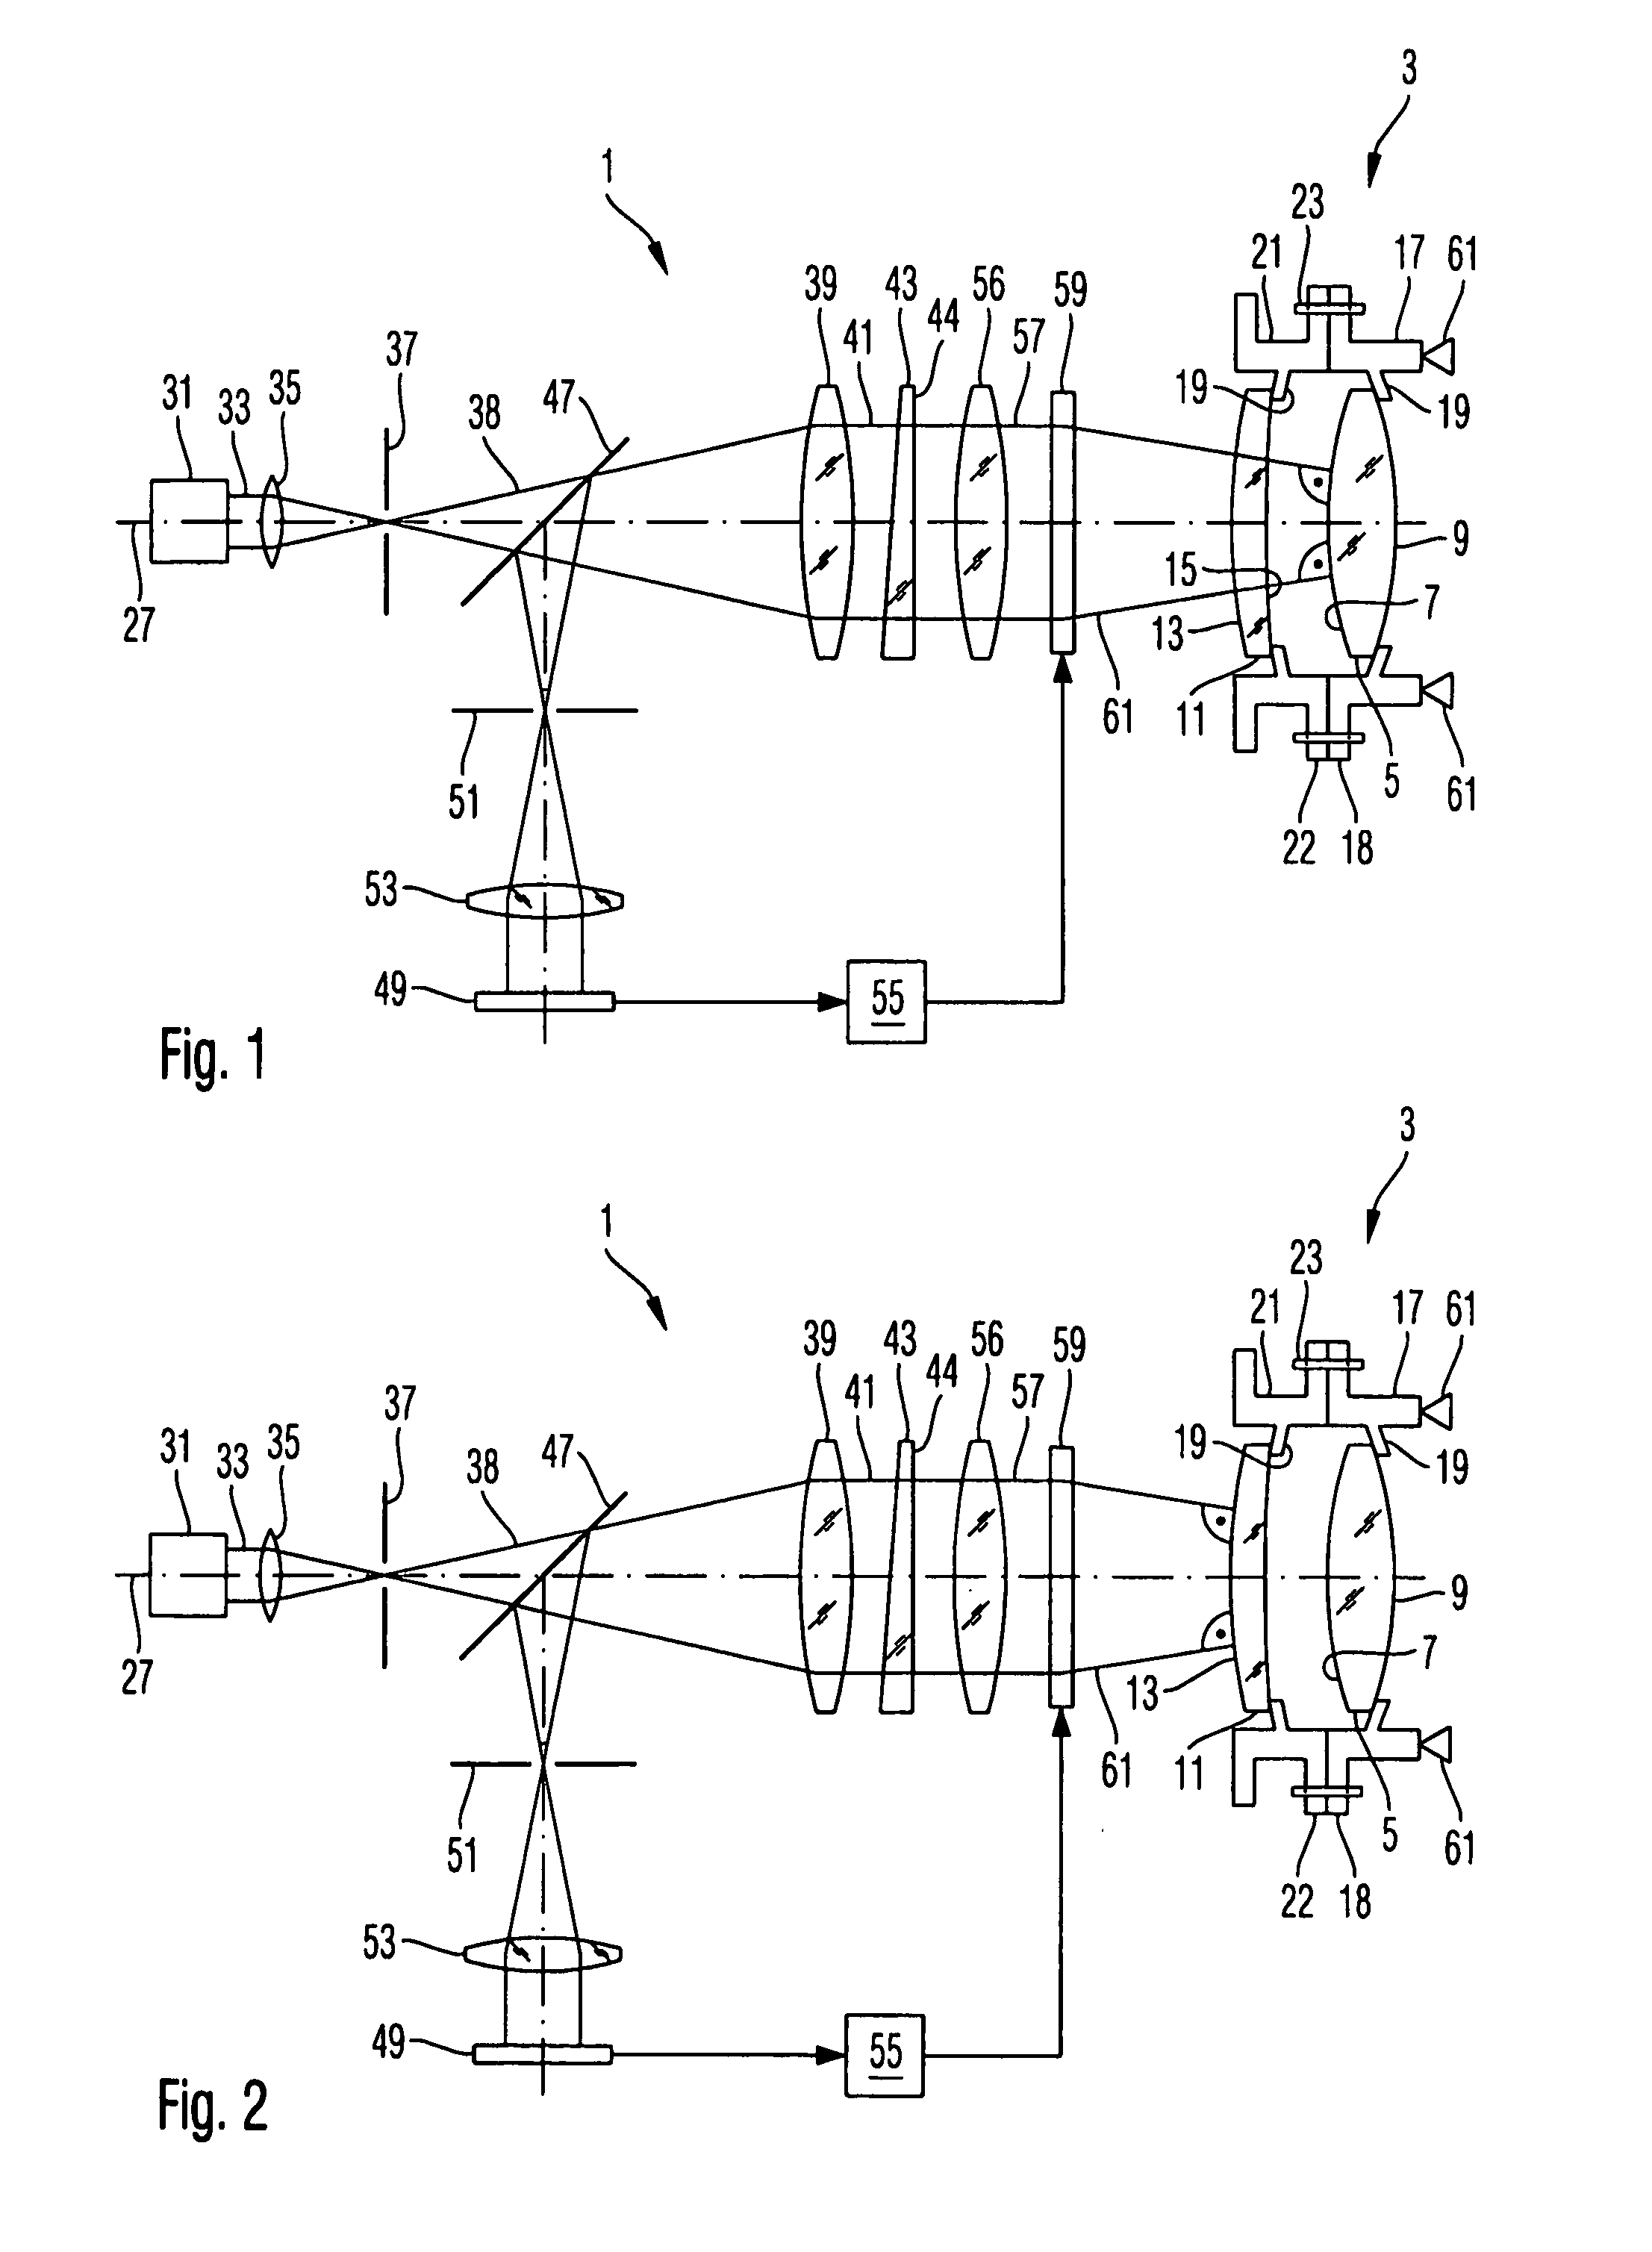 Method of aligning an optical system